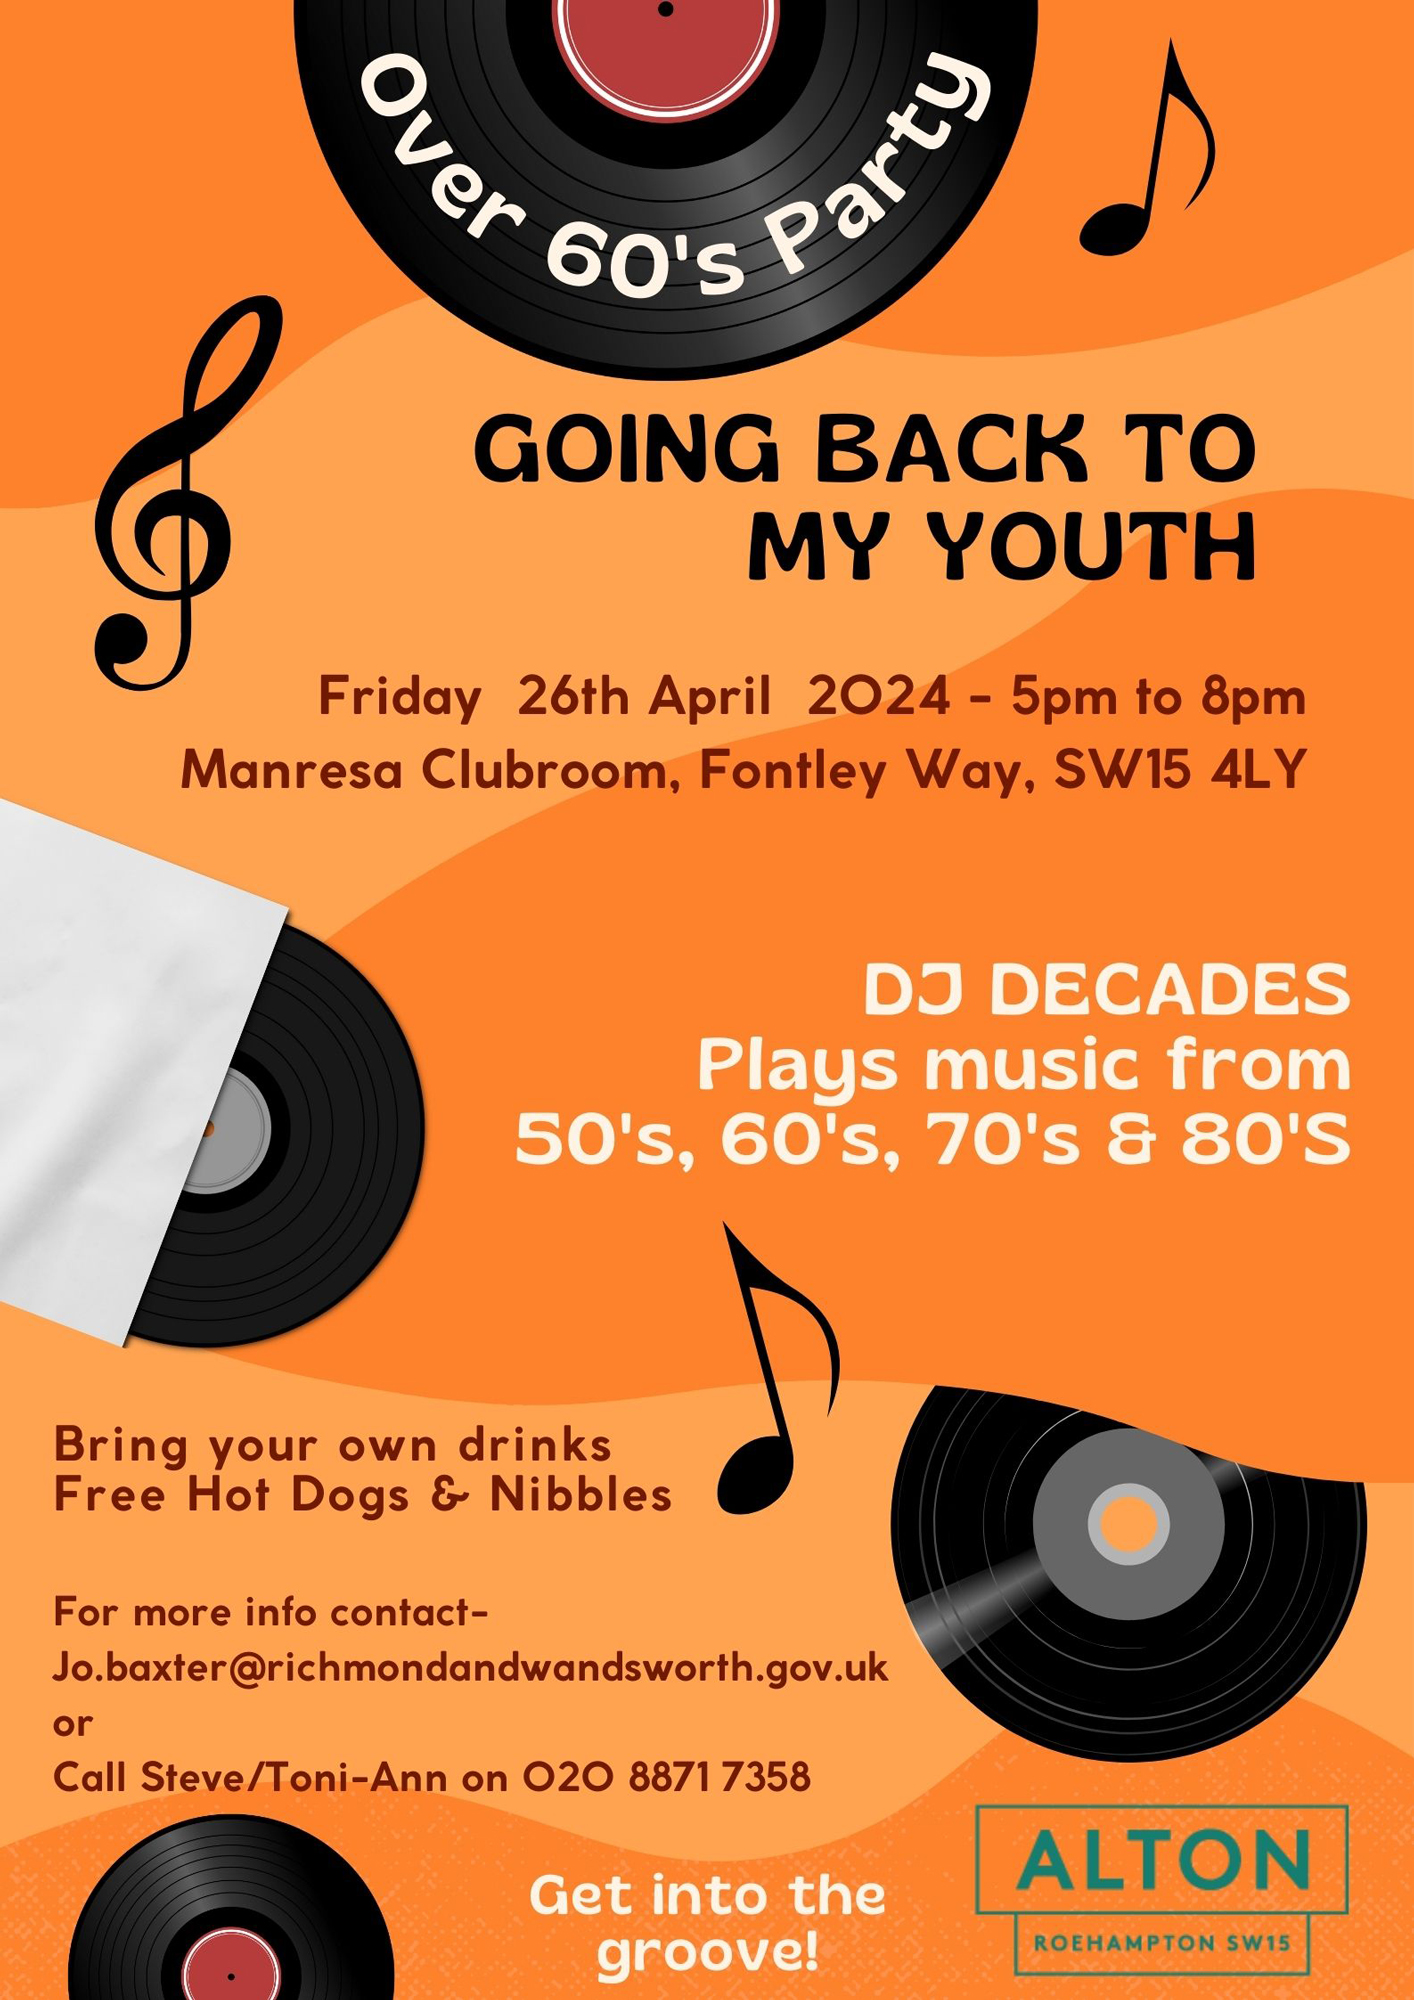 Poster advertising the Going back to my youth event